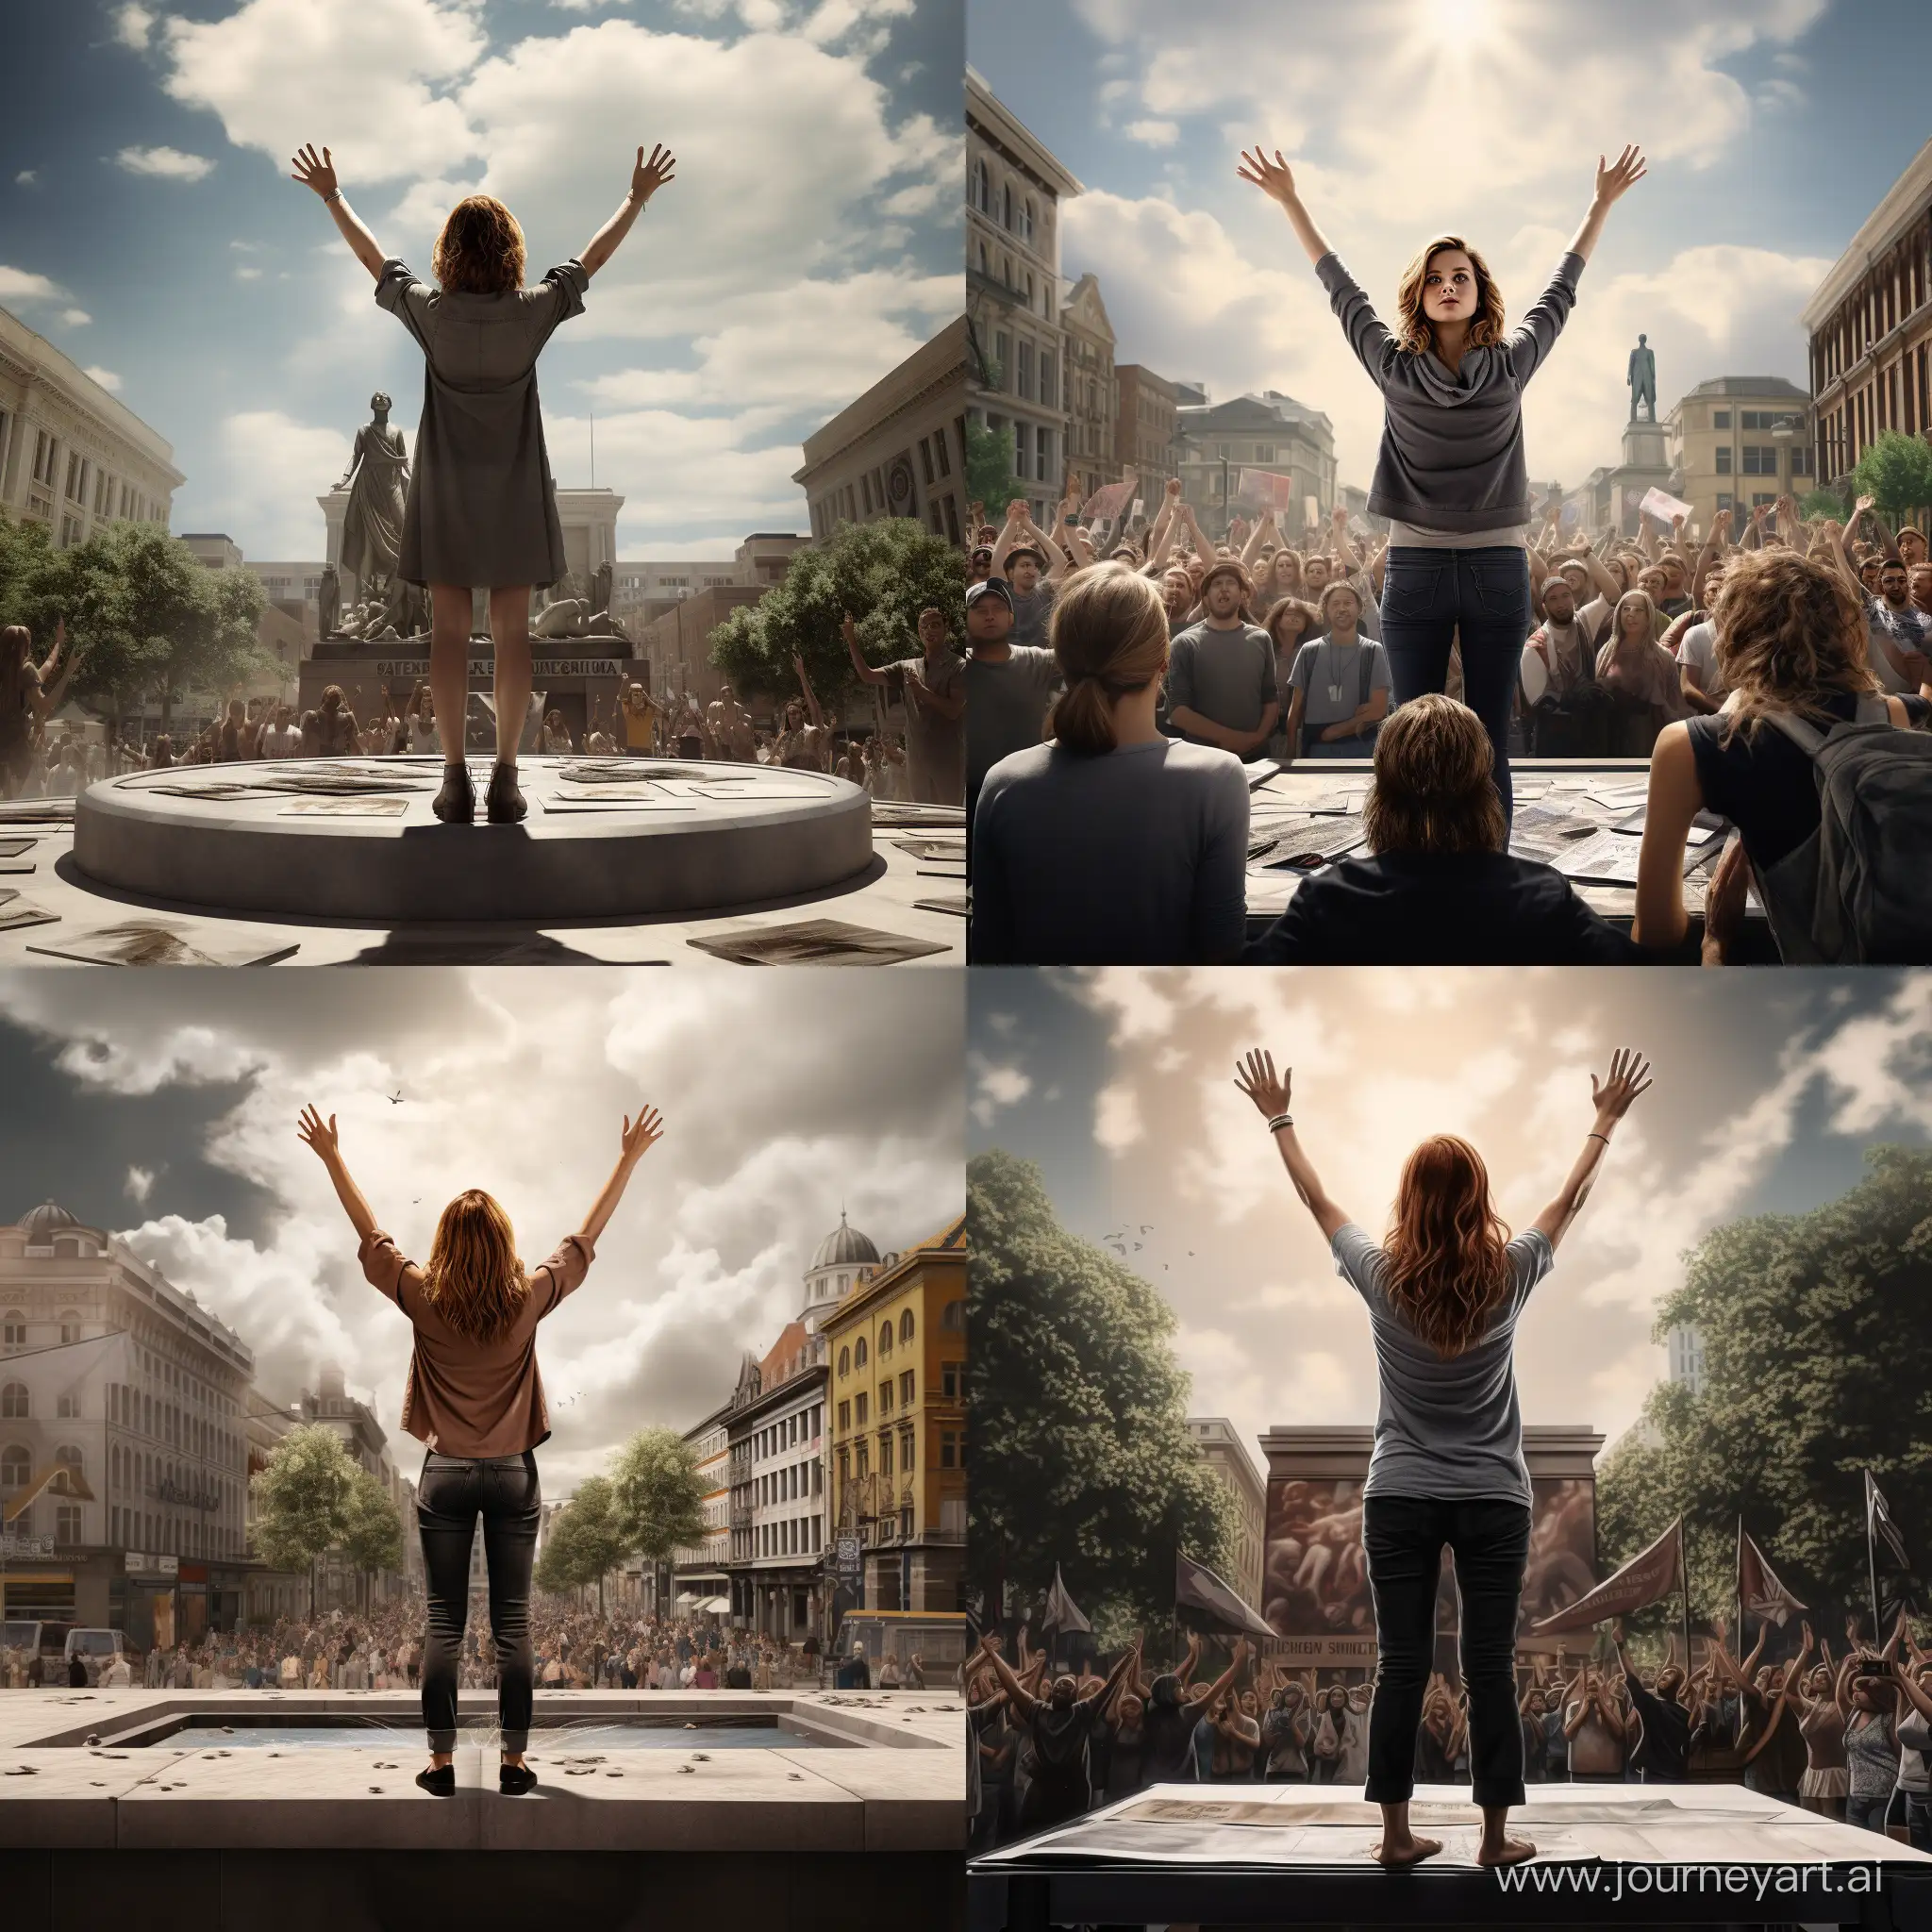 Girl-in-Central-Square-Inspiring-Action-Hyperrealistic-Photography